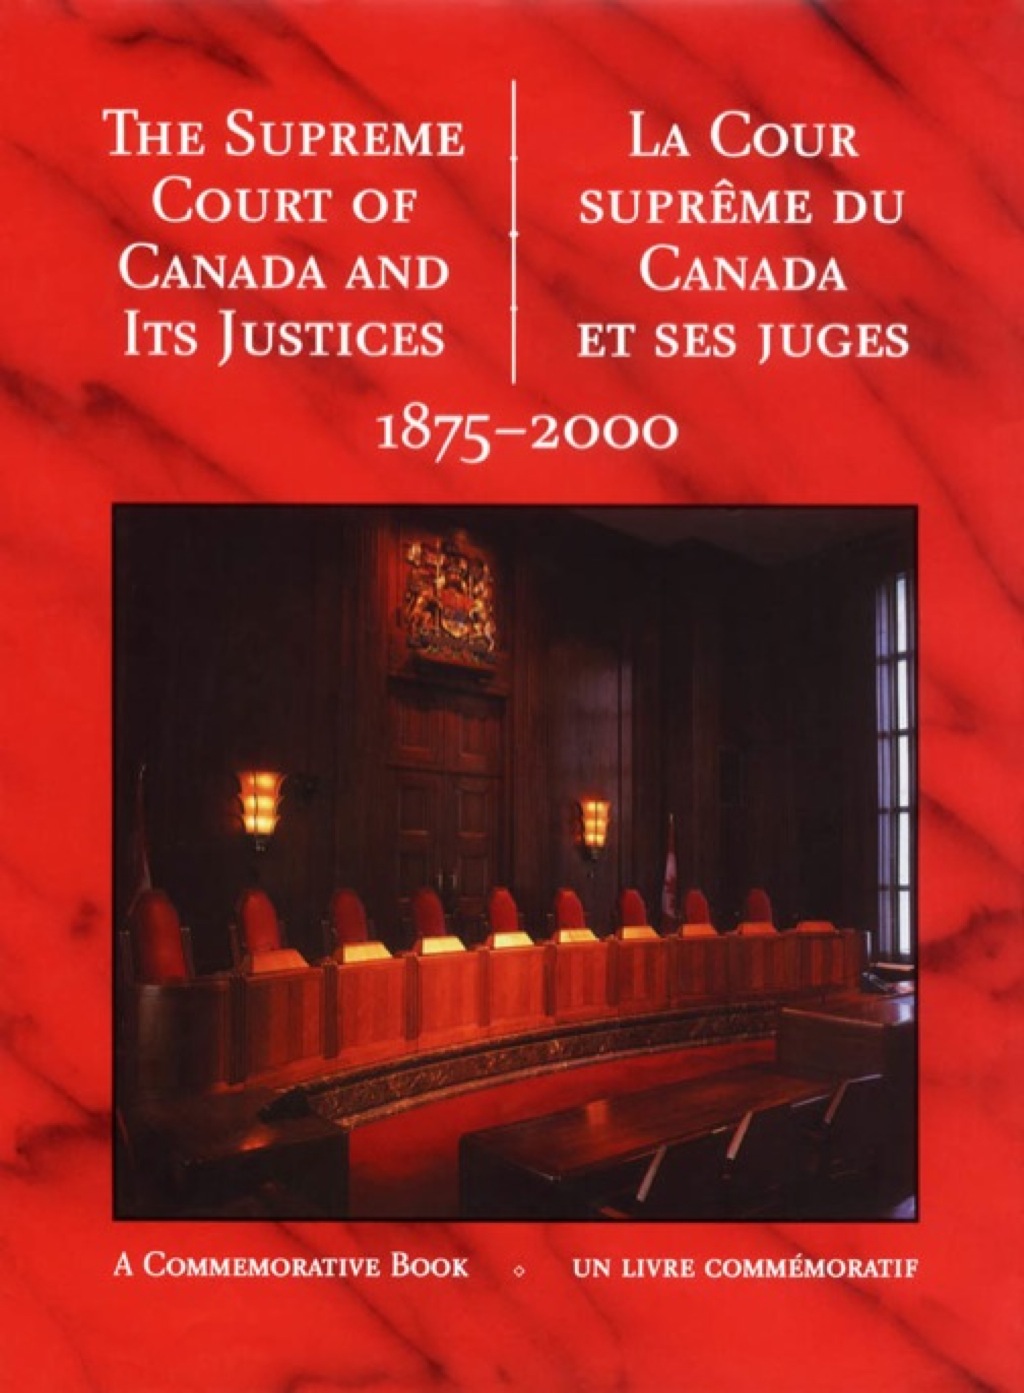 The Supreme Court of Canada and its Justices 1875-2000 (eBook) - Supreme Court of Canada; Public Works and Government Services Canada,